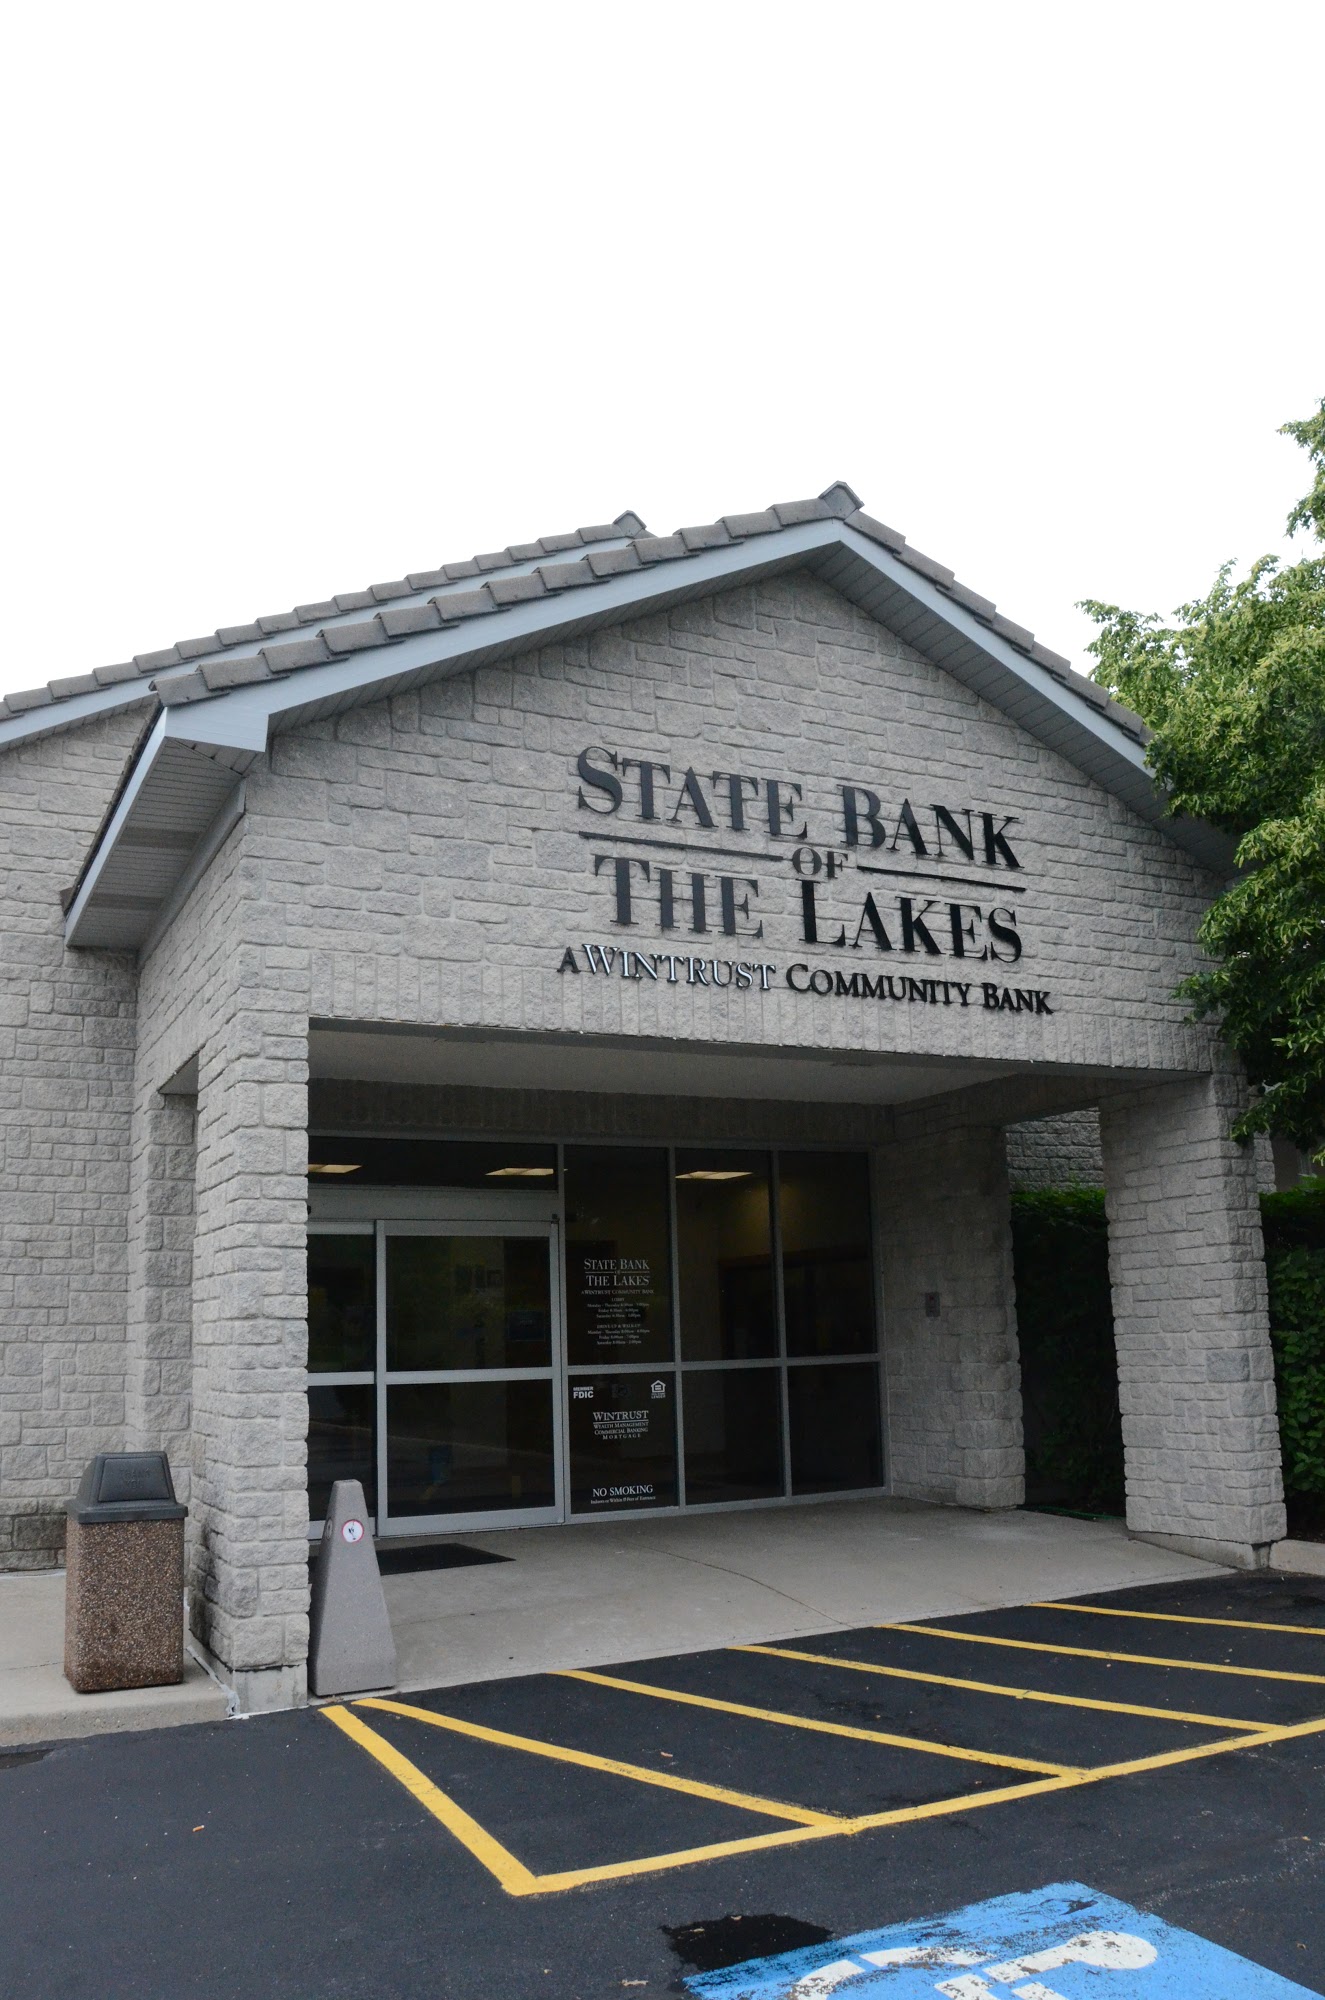 State Bank of the Lakes